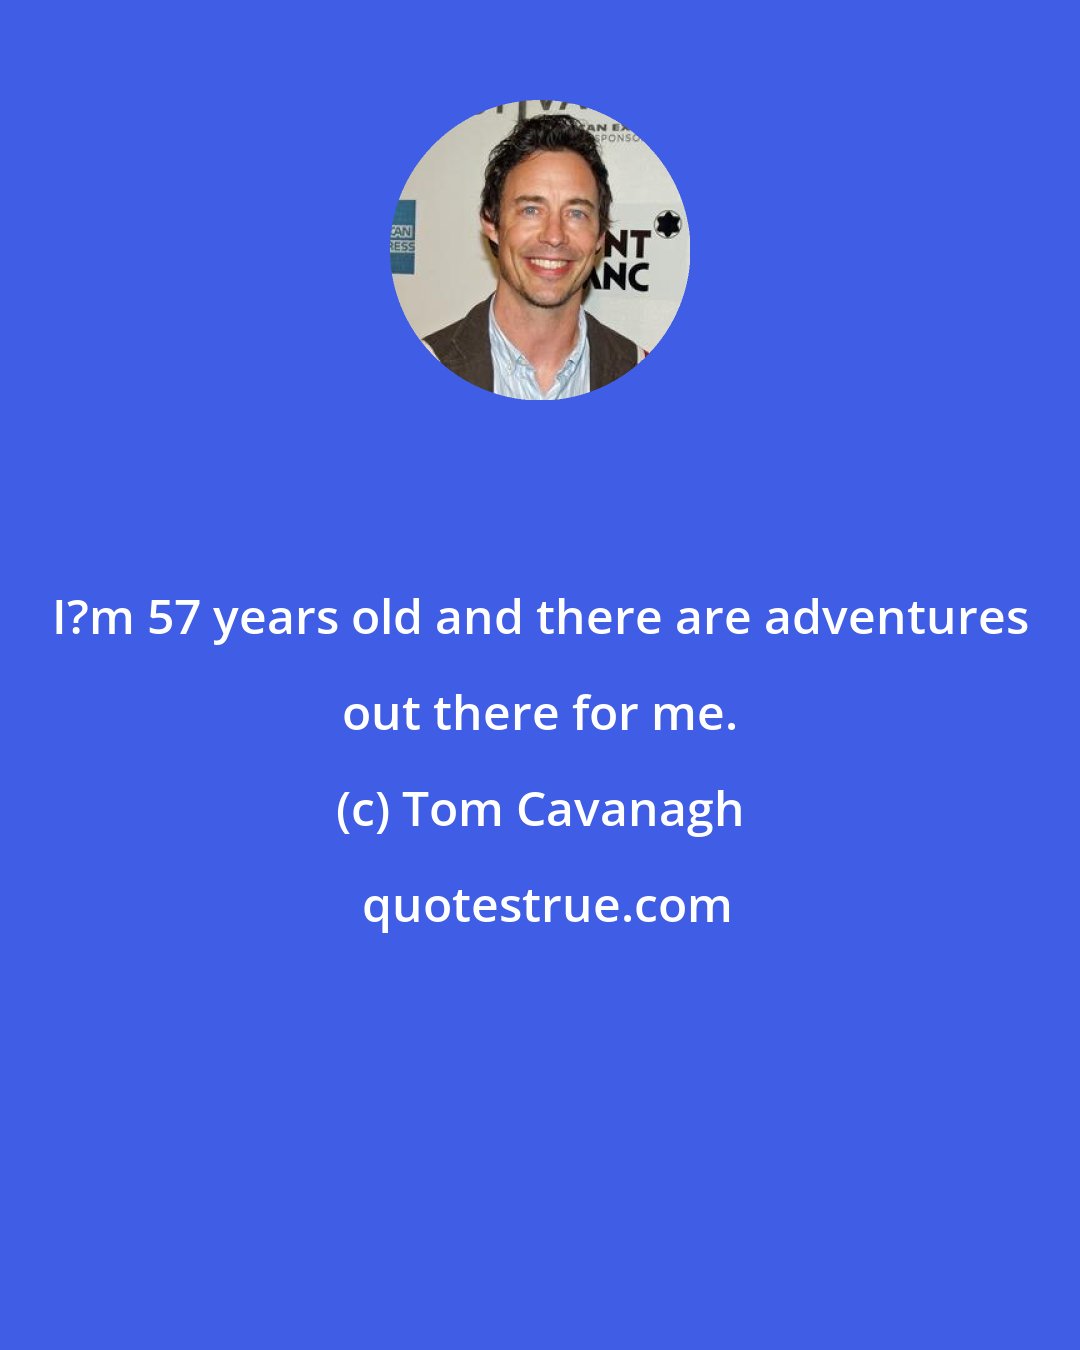 Tom Cavanagh: I?m 57 years old and there are adventures out there for me.